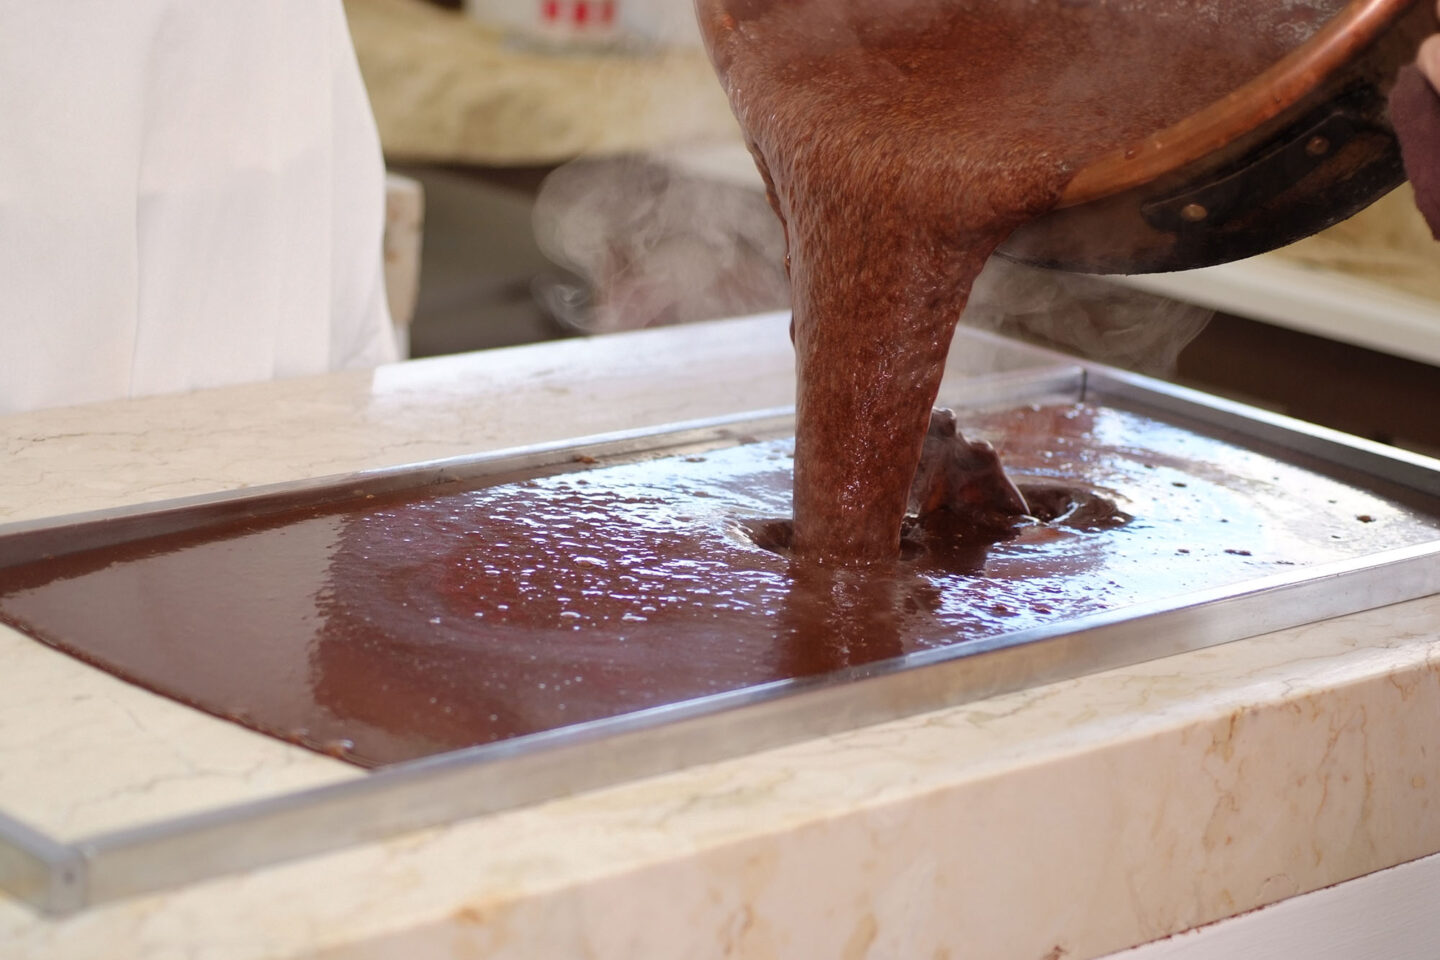 Fudge being made at Ryba's Fudge Shop - hot fudge being poured